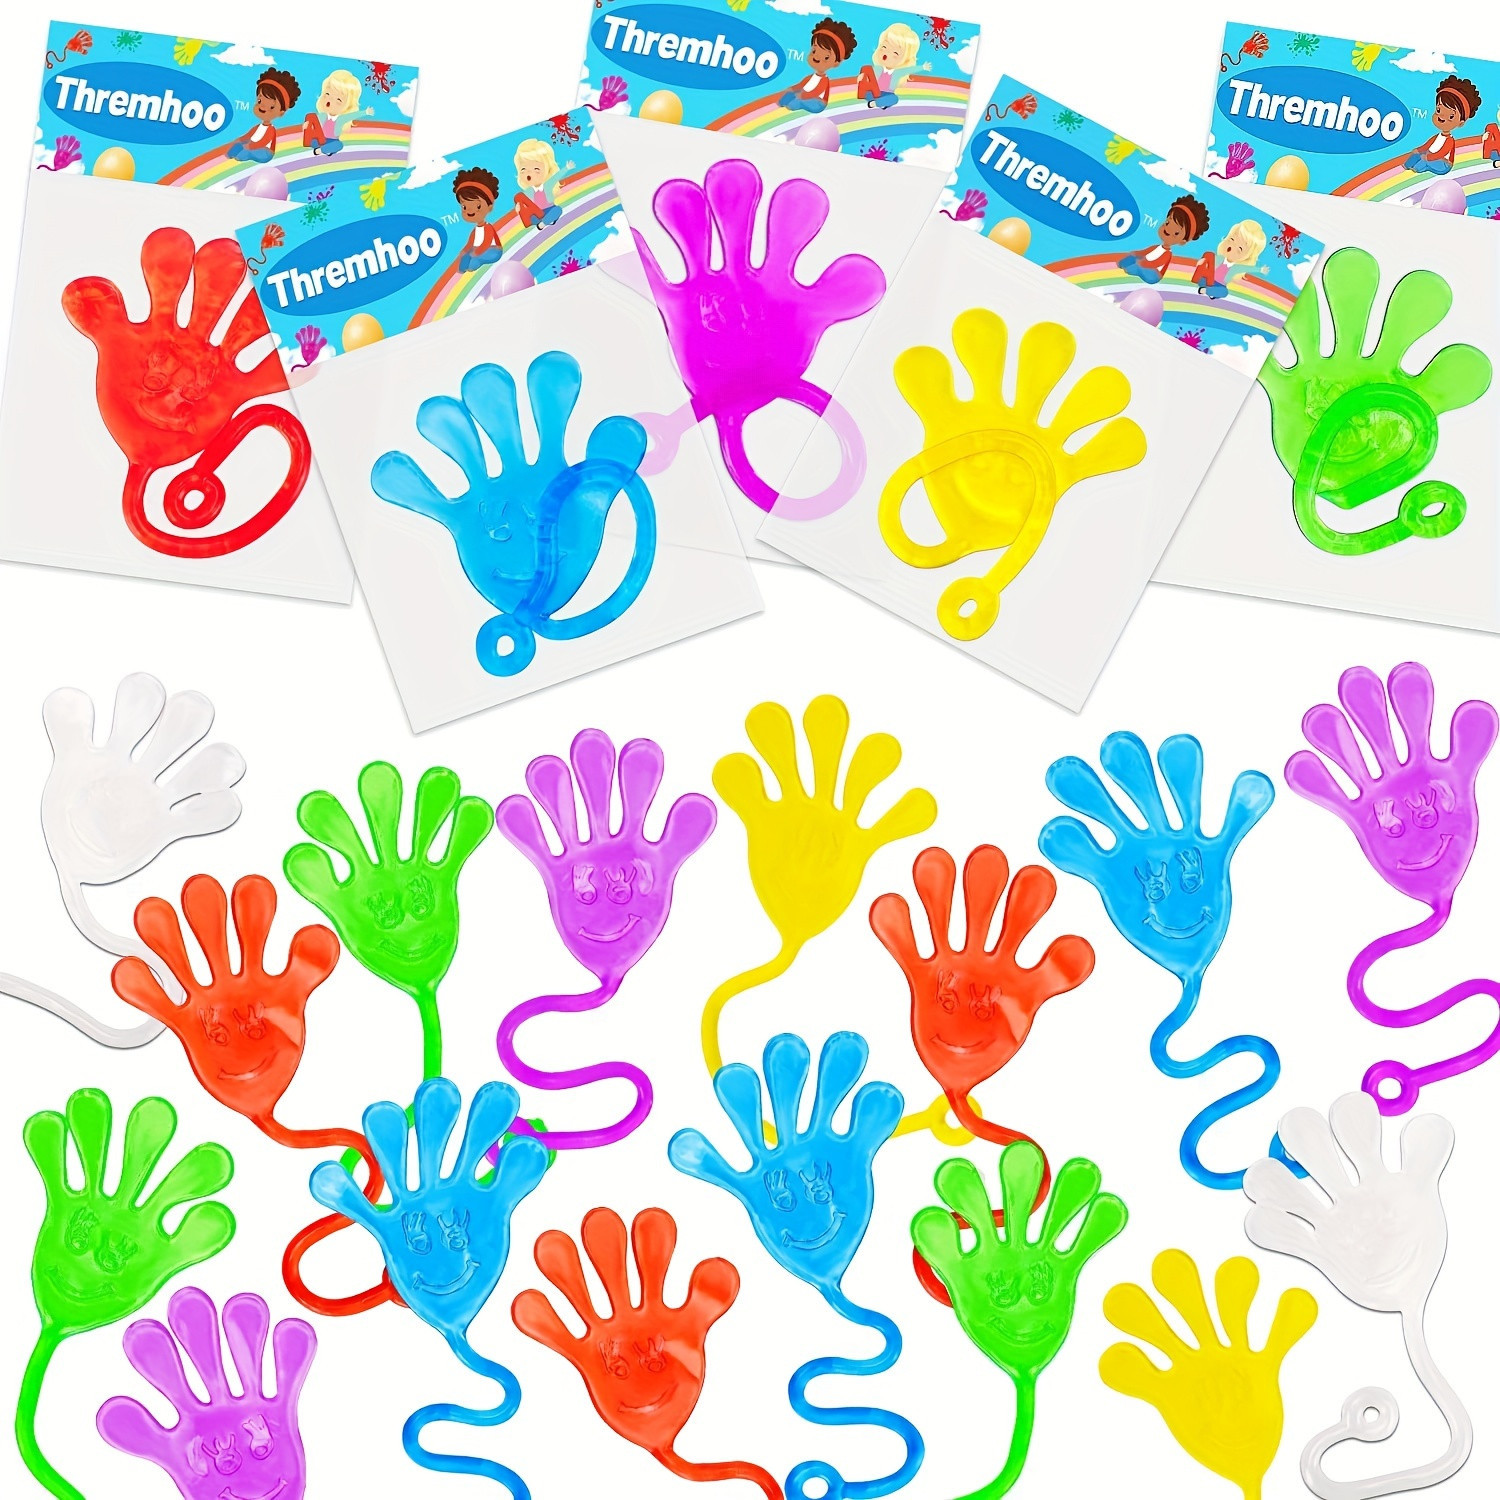 48 Pcs 2 Inches Stretchy Sticky Hands Toys Best Gift for Children Party Favors, Birthdays